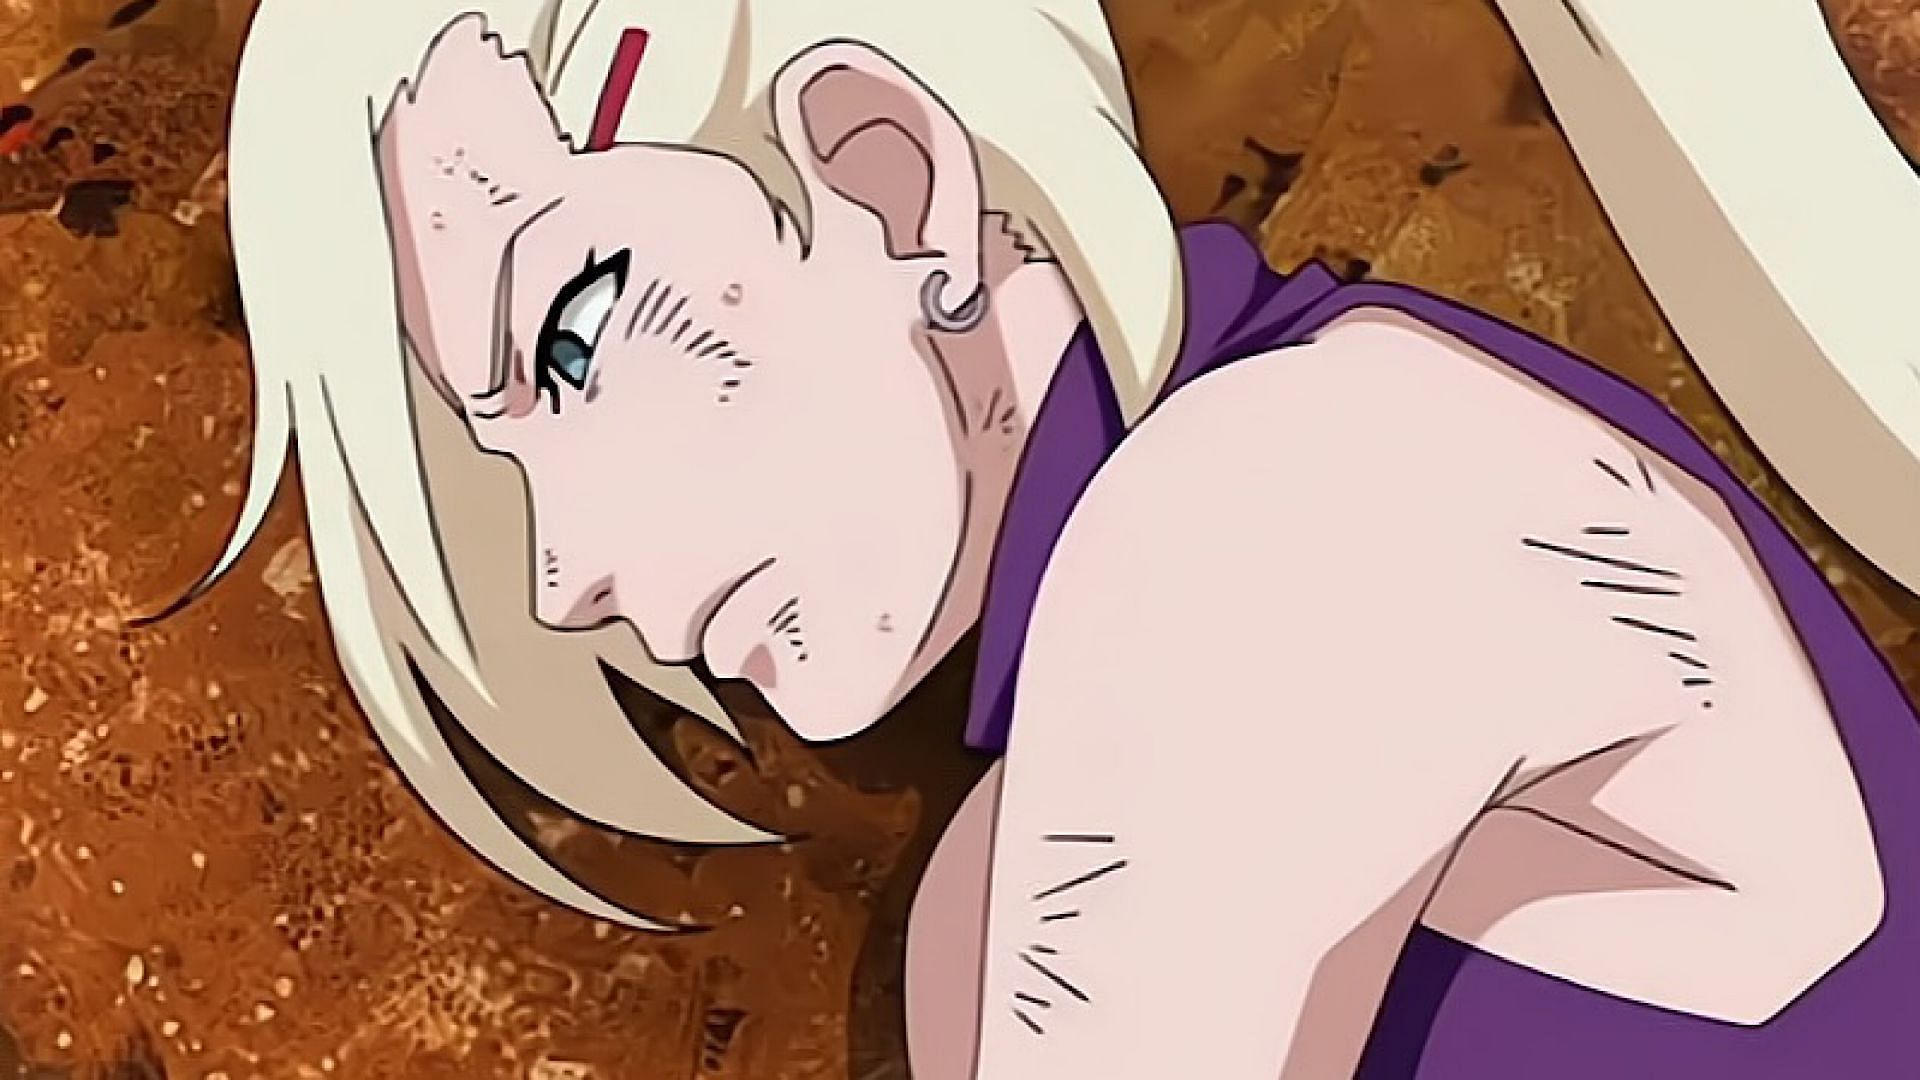 4 times Ino used her Jutsu wisely in Naruto (& 4 times she didn't)